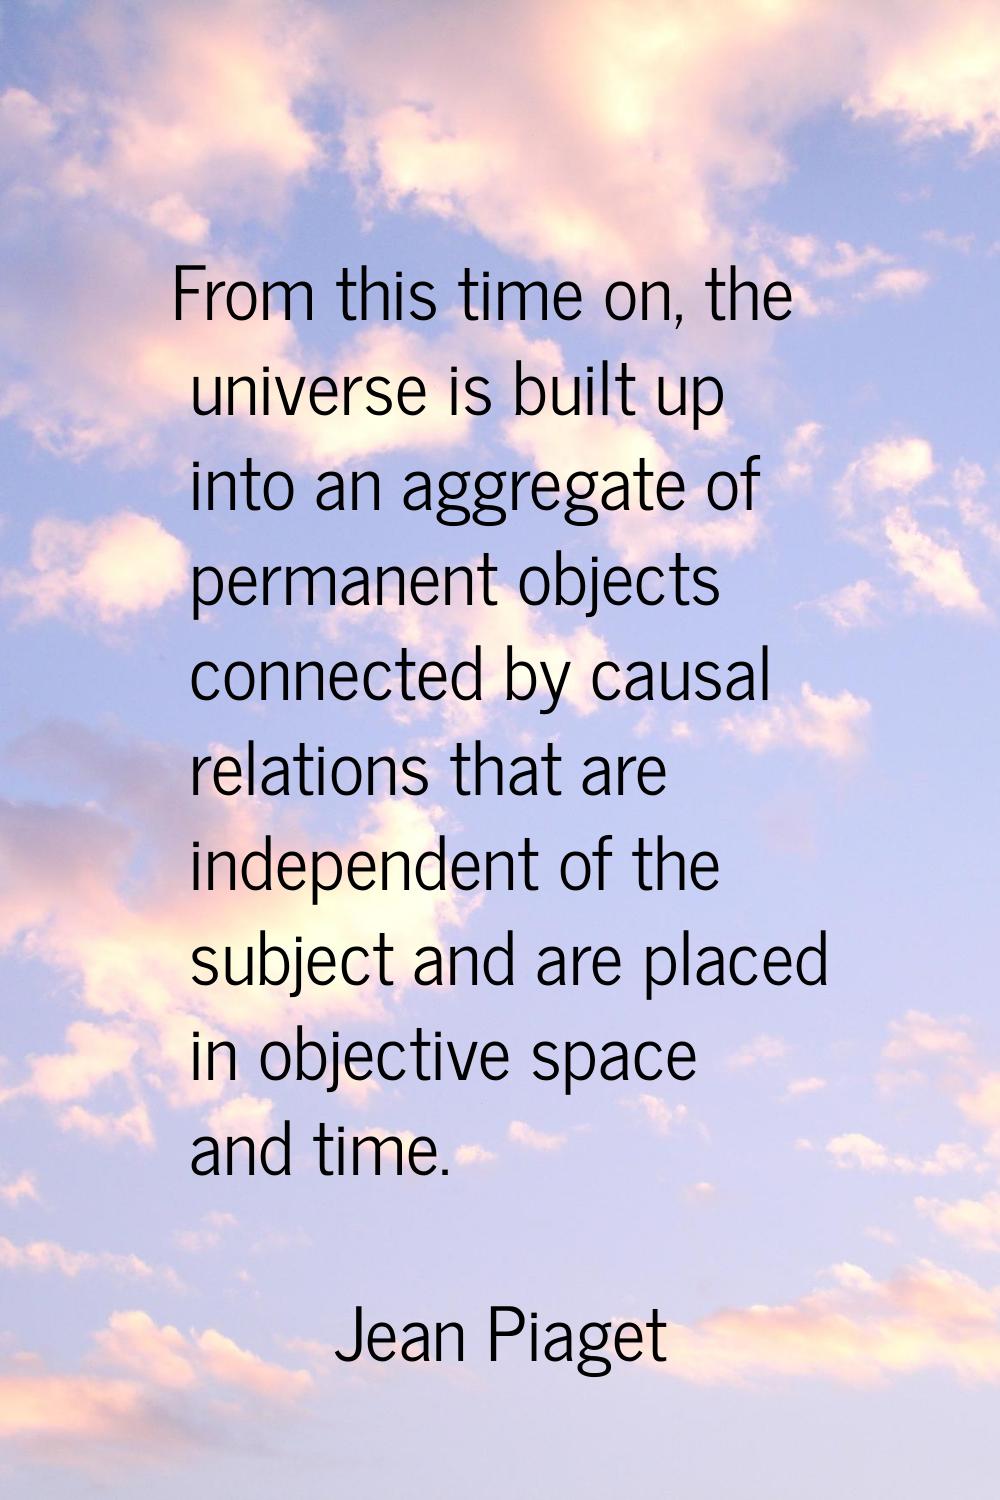 From this time on, the universe is built up into an aggregate of permanent objects connected by cau